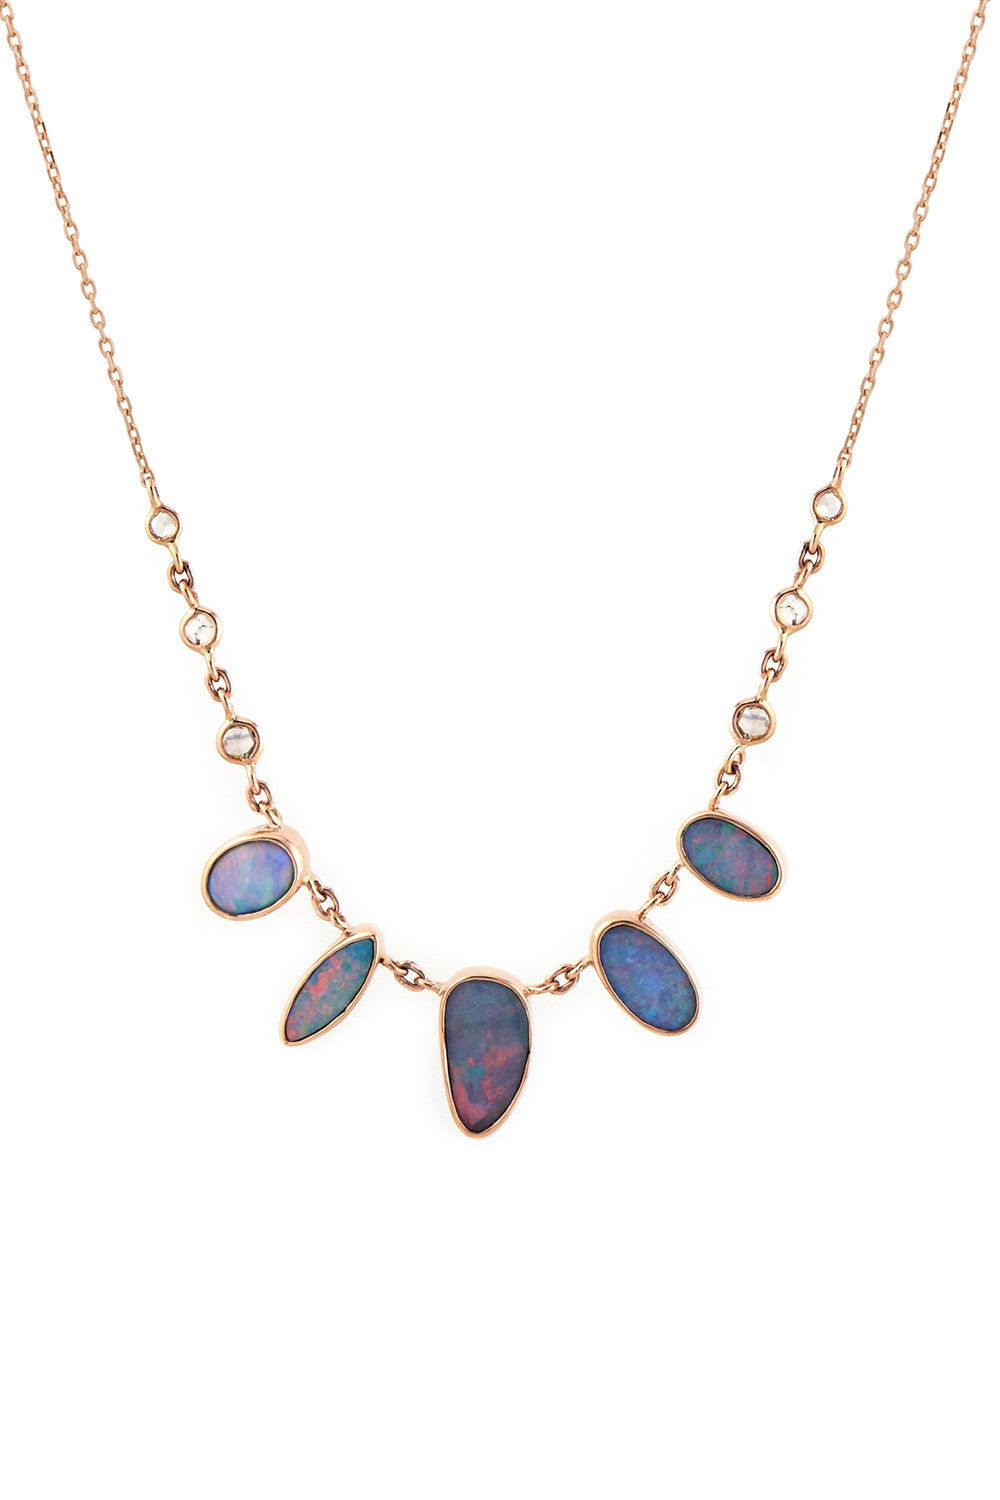 GOLD OPAL AND DIAMONDS NECKLACE